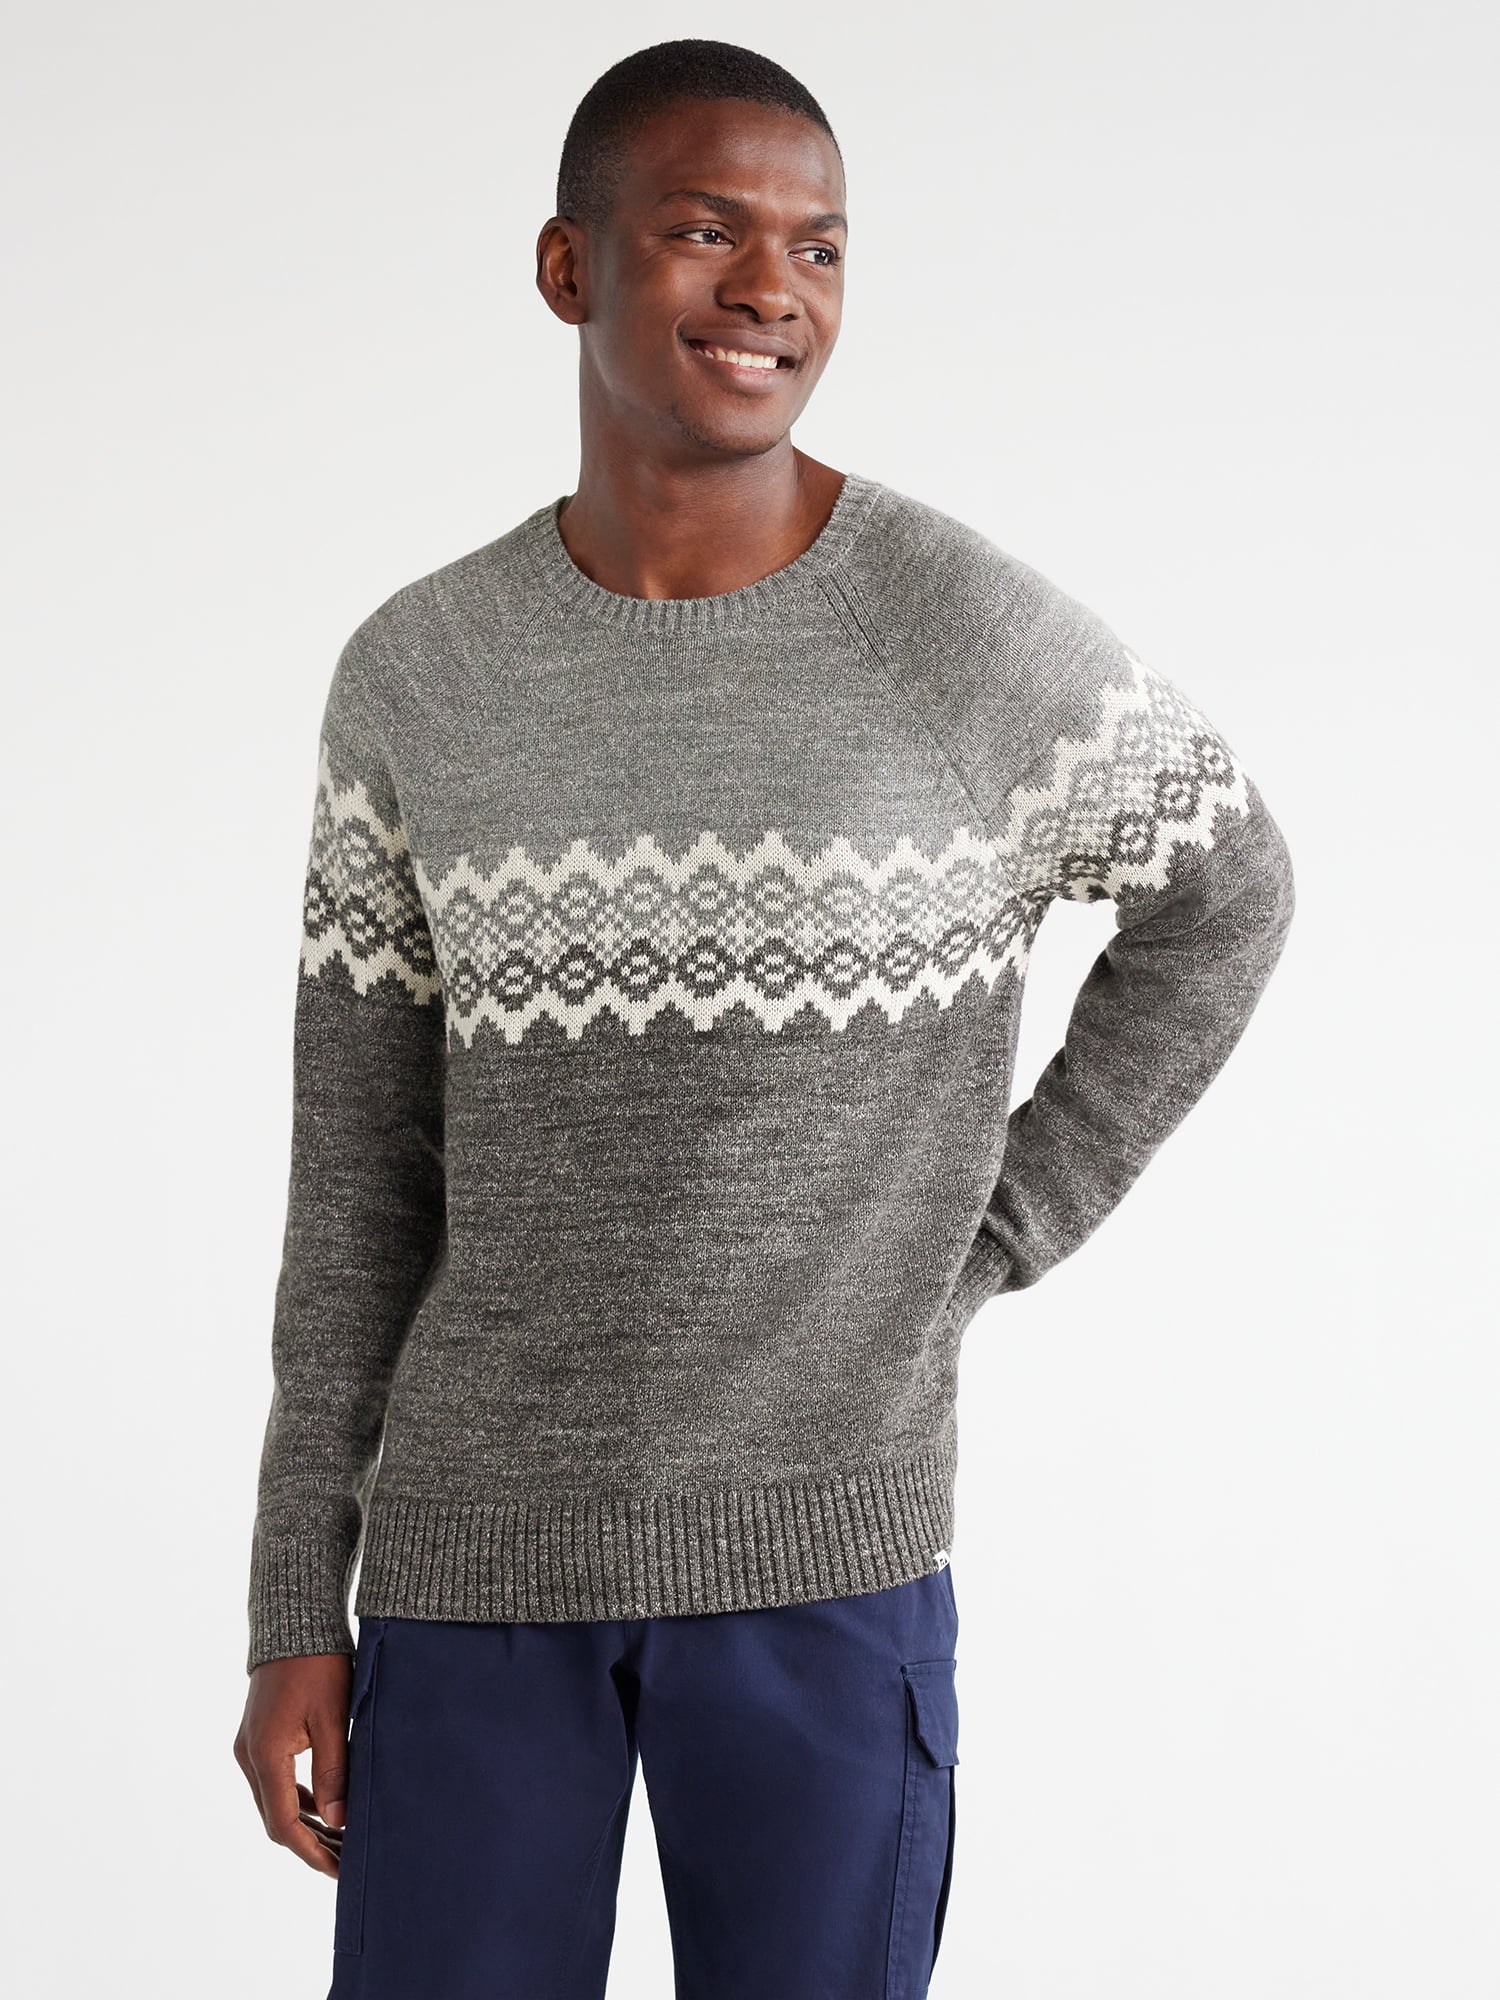 Free Assembly Men's Fair Isle Sweater with Long Sleeves, Sizes XS-3XL ...